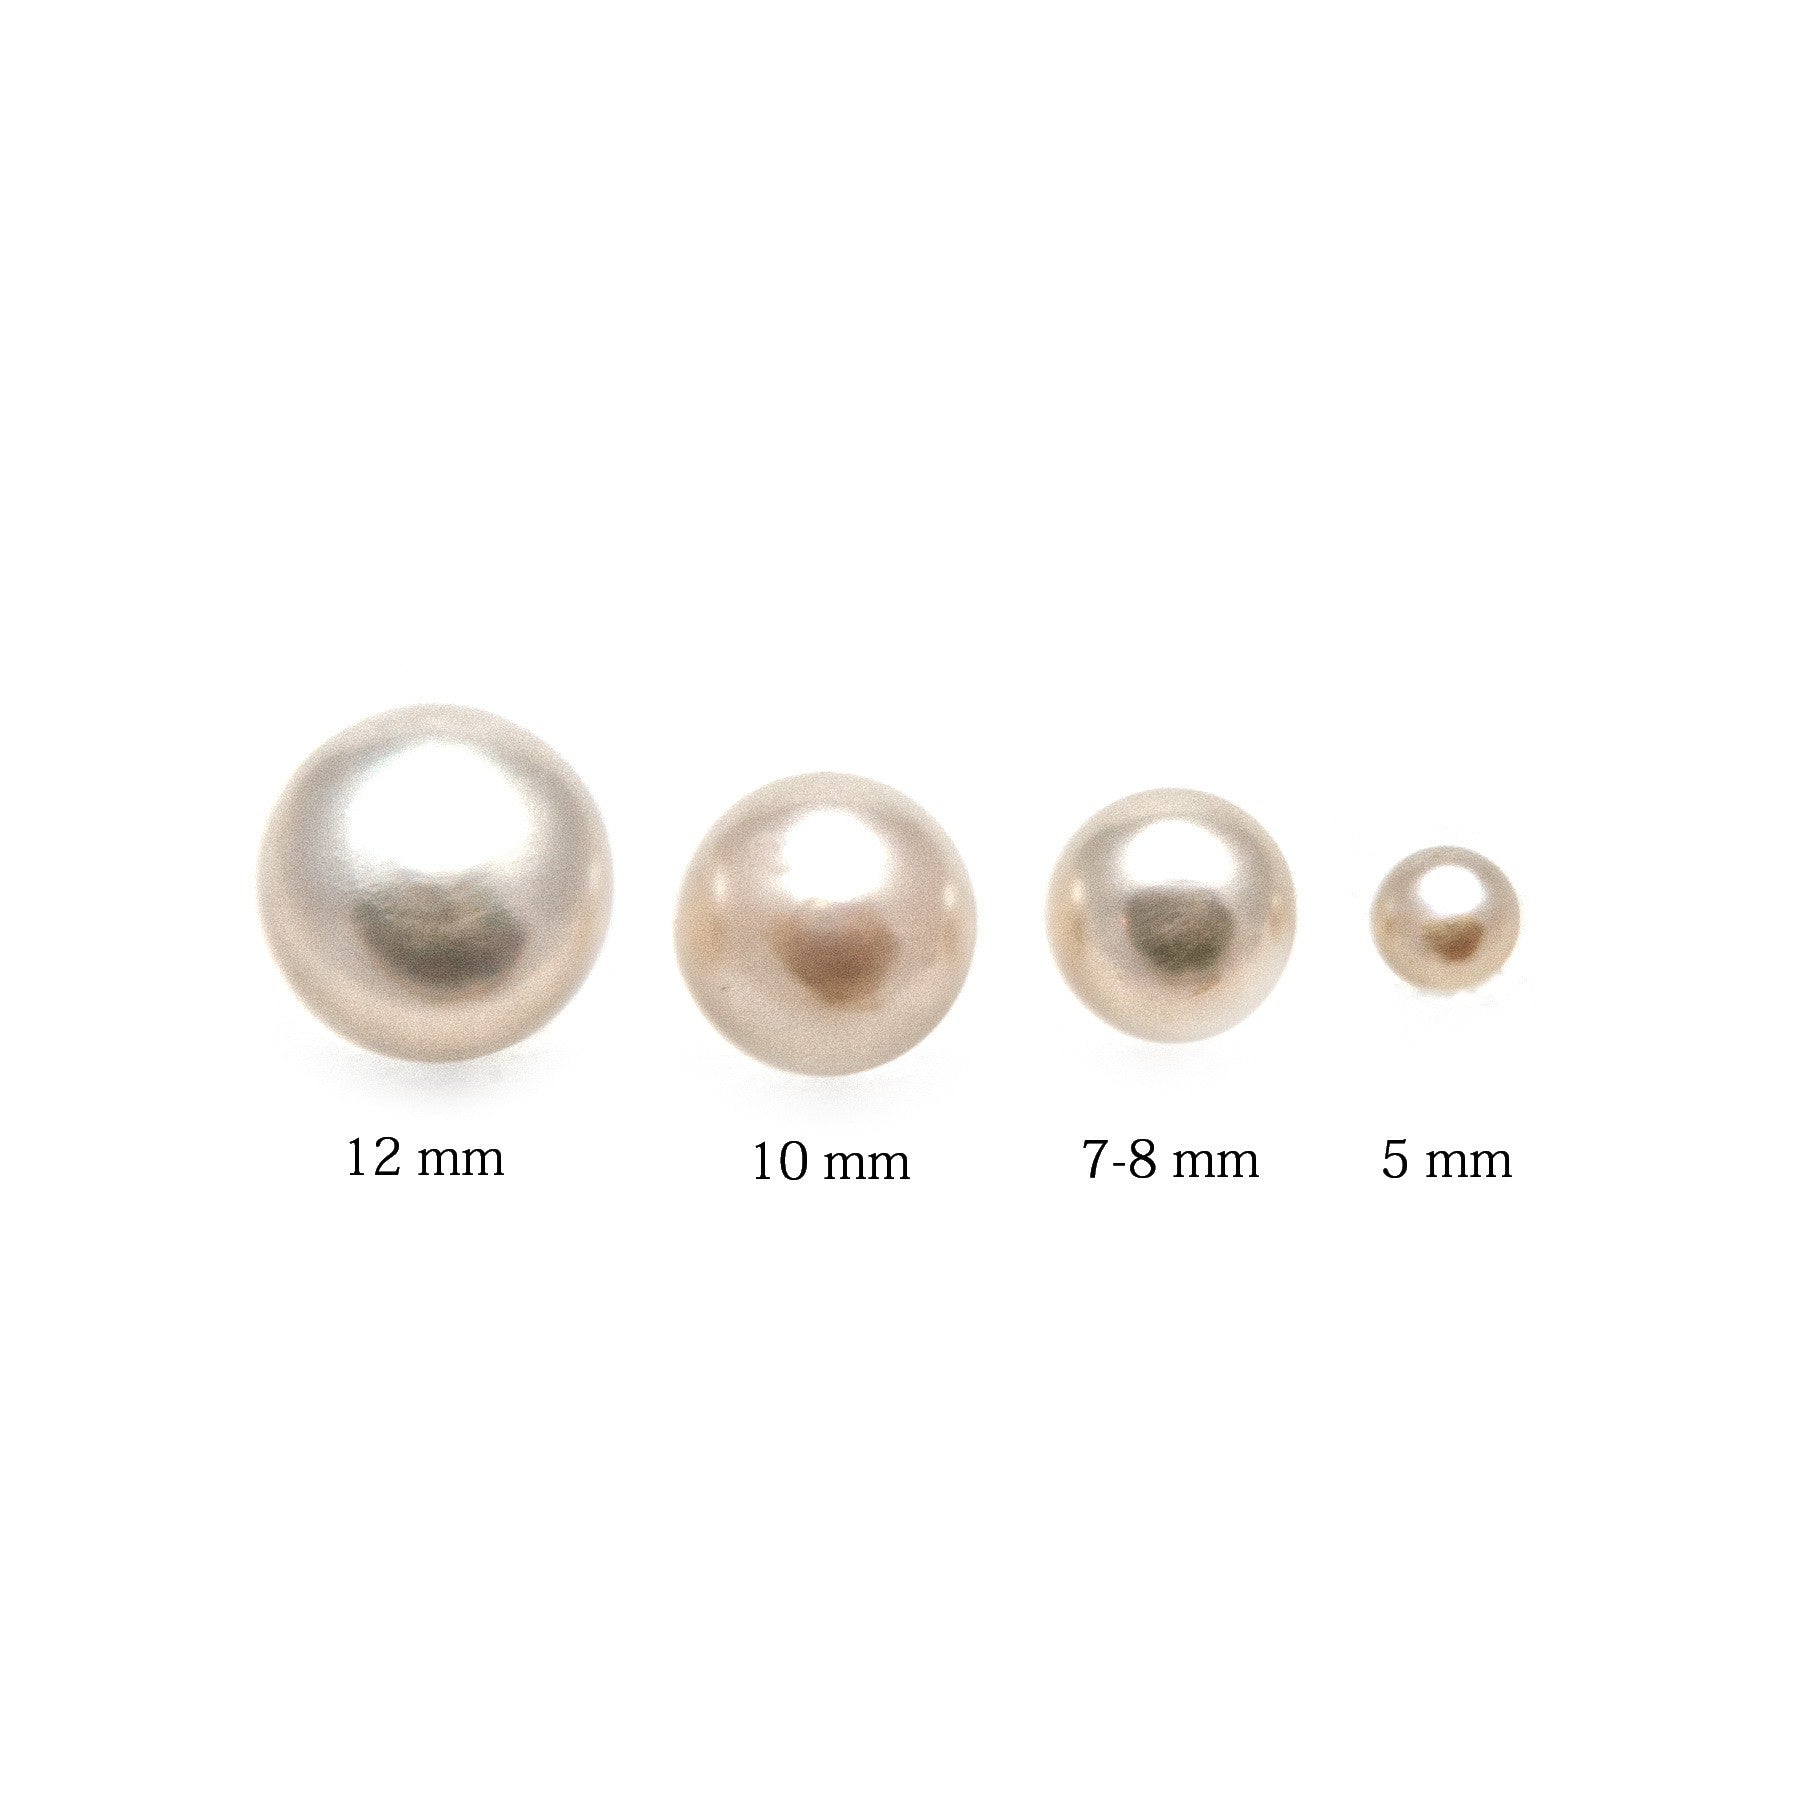 Freshwater Pearls Value: Evaluation - TPS Blog